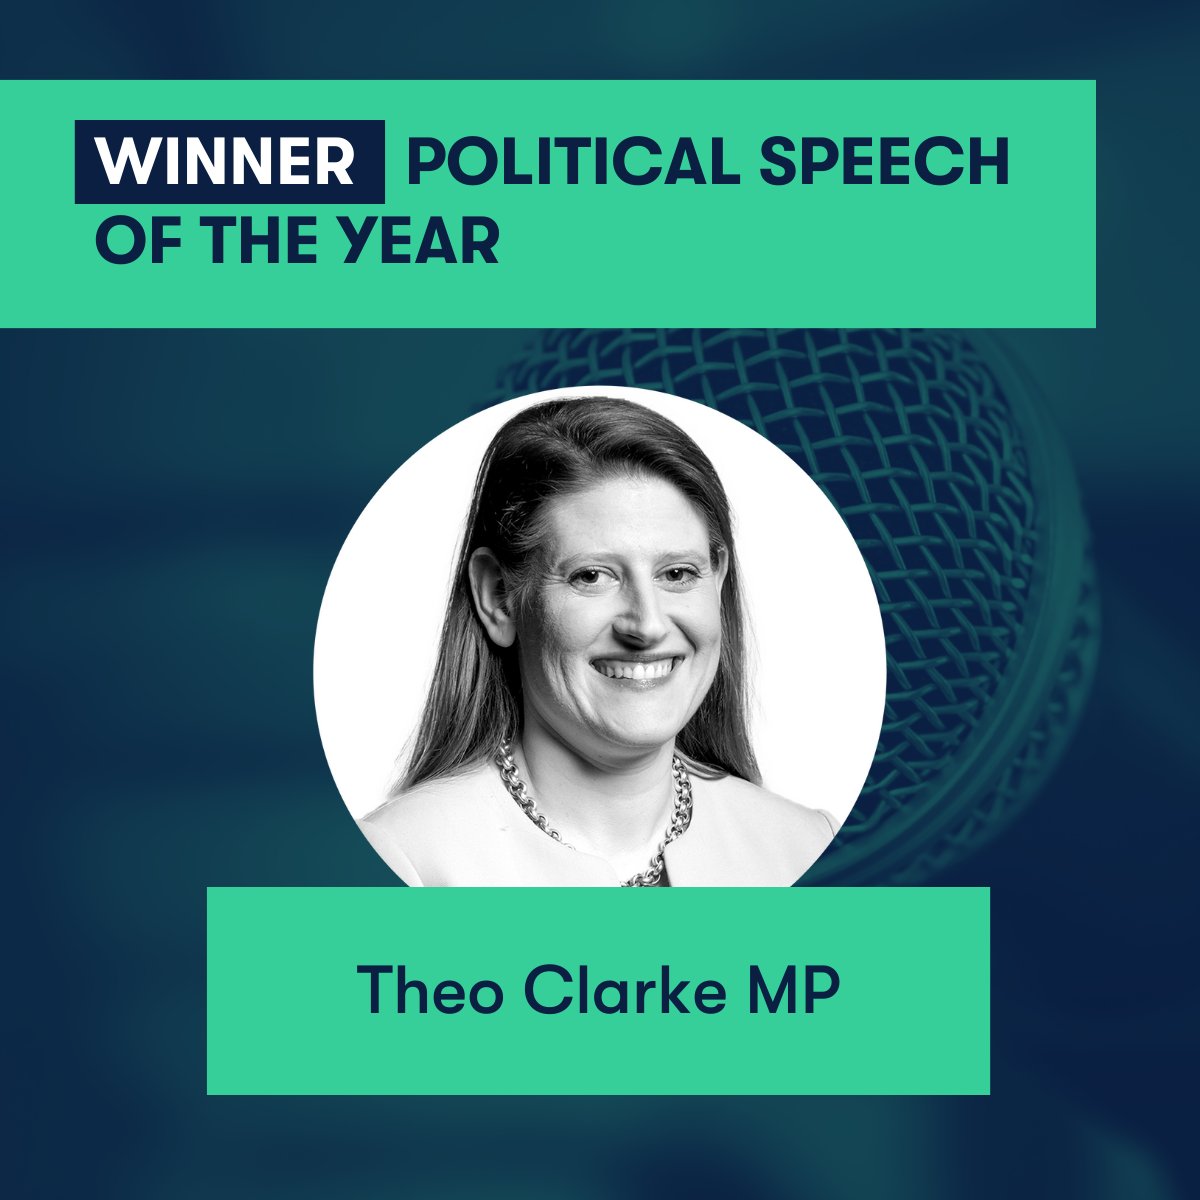 The winner of ‘Political Speech of the Year’ is Theo Clarke! Awarded for her emotional and immensely brave speech in the House of Commons about her traumatic childbirth experience. Massive congratulations, @theodoraclarke! #PagefieldParliamentarianAwards